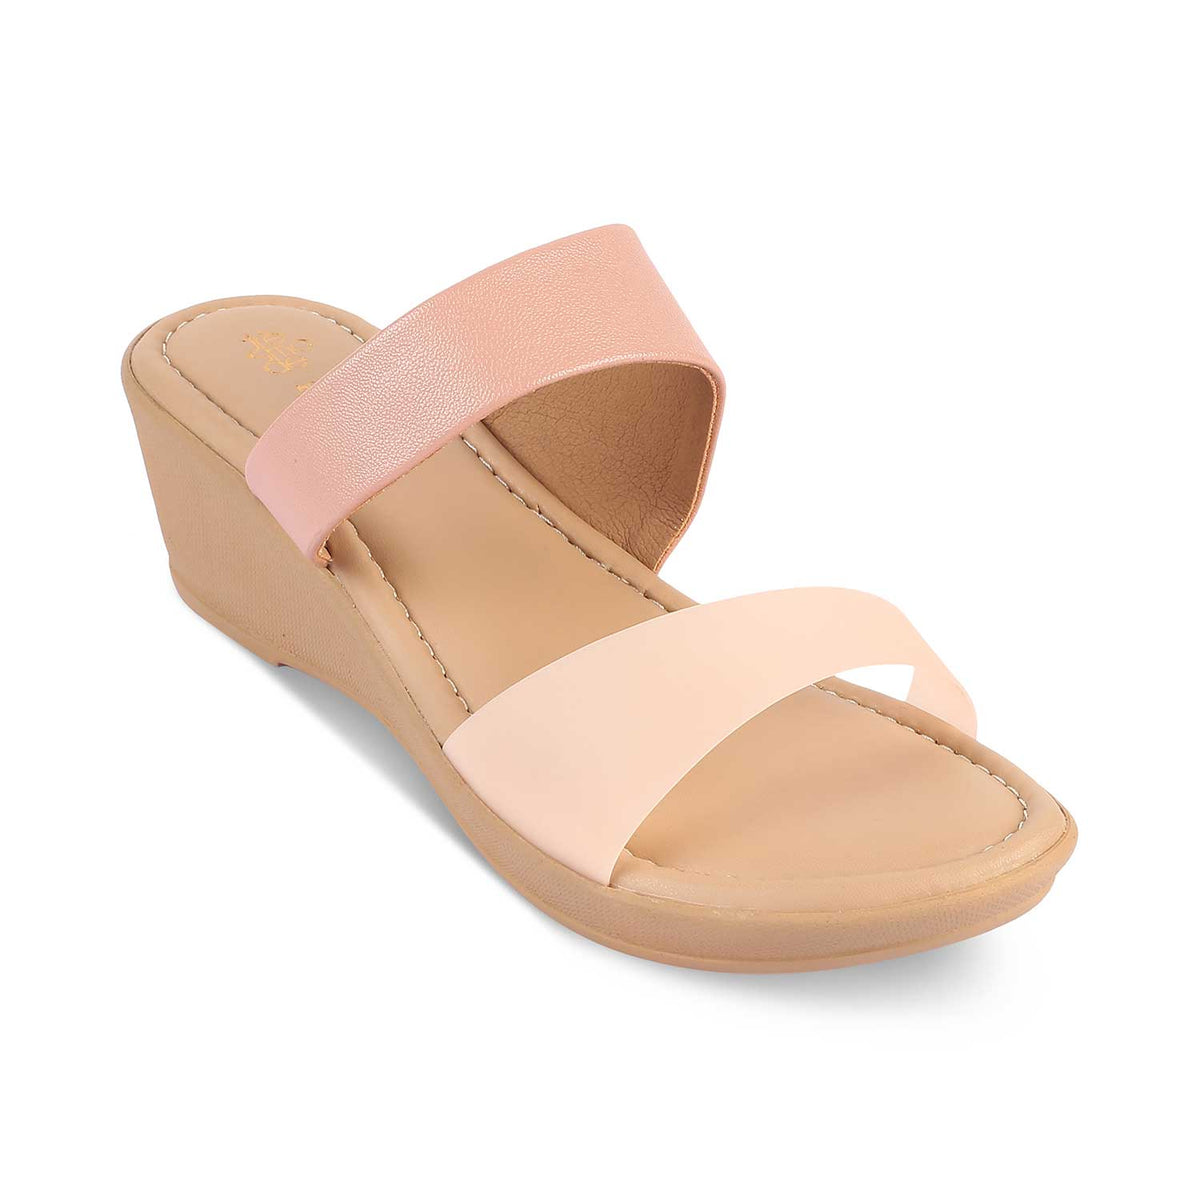 The Sios Pink Women's Casual Wedge Sandals Tresmode